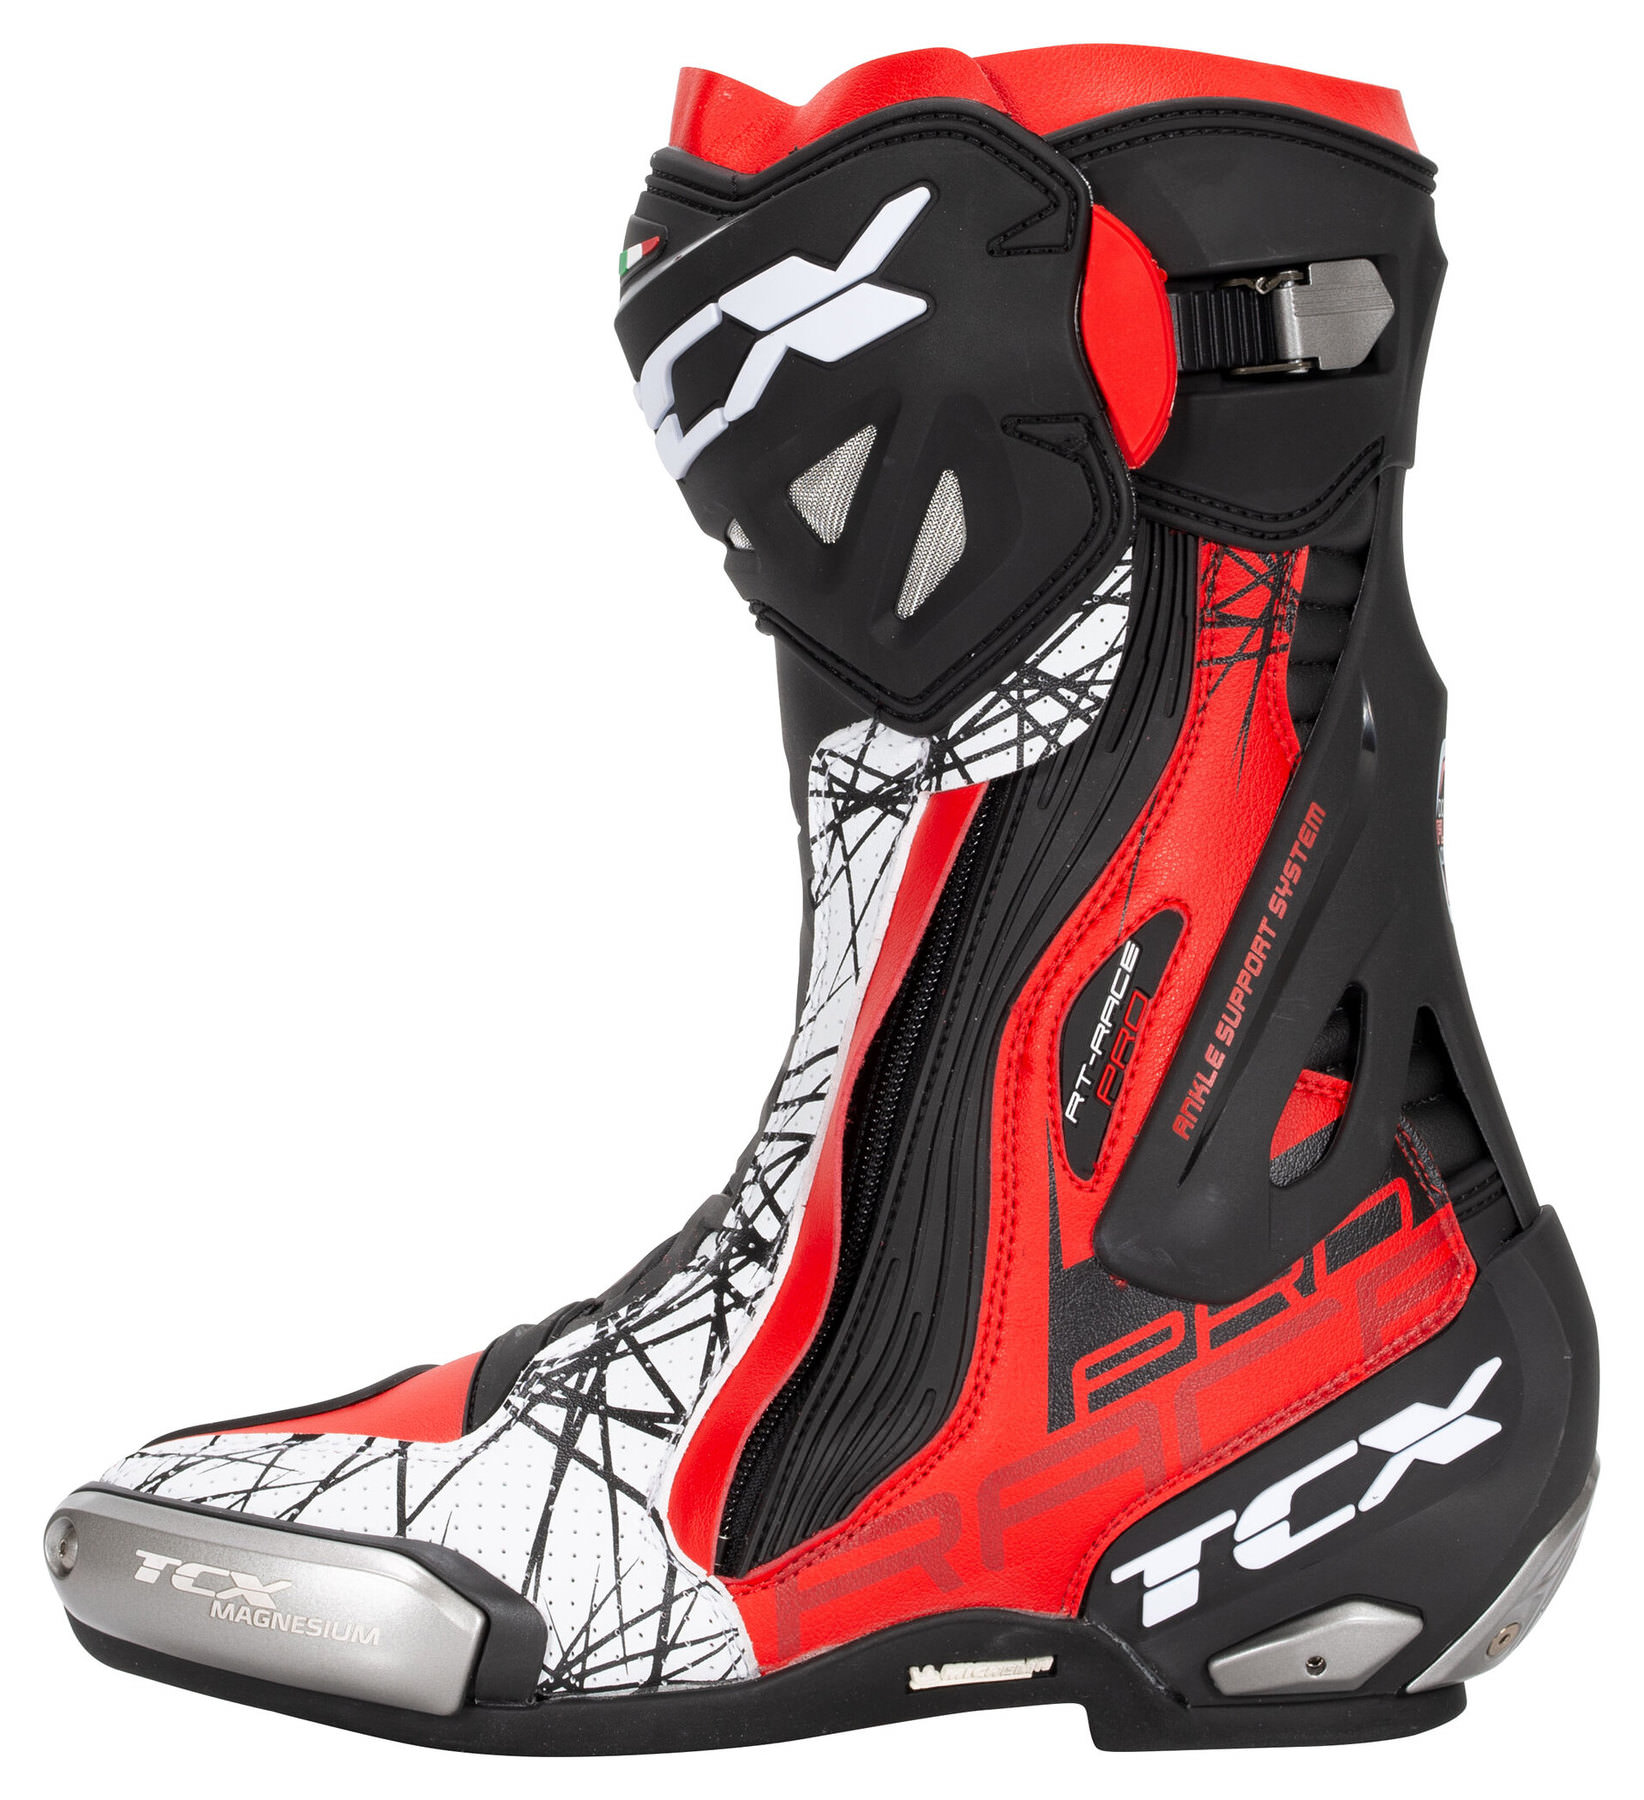 Buy > motorcycle race boots > in stock